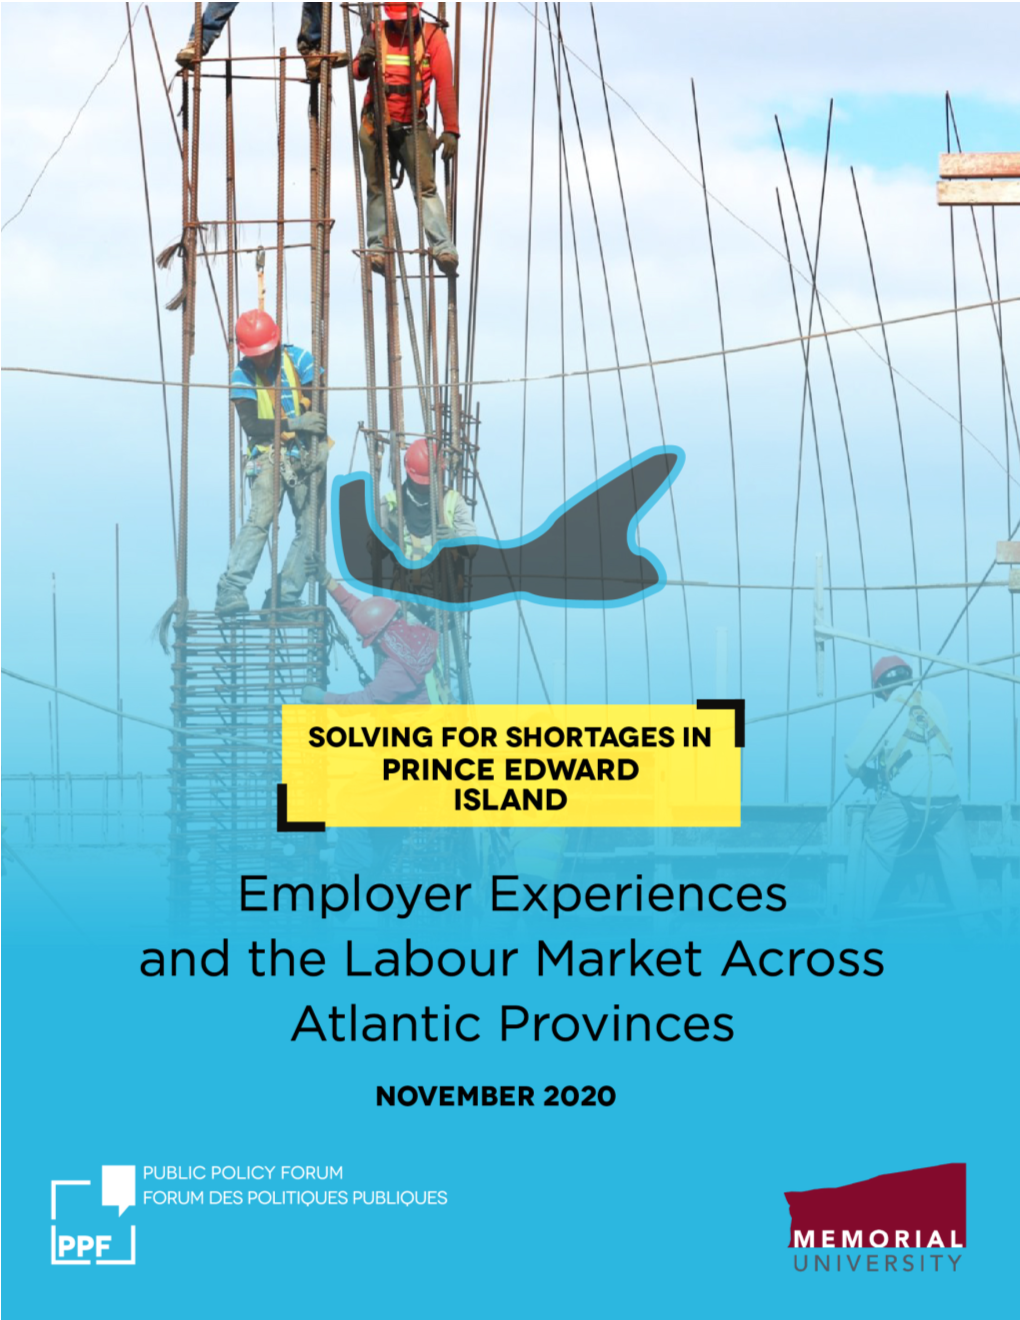 What Affects Skills & Labour Shortages in Prince Edward Island?